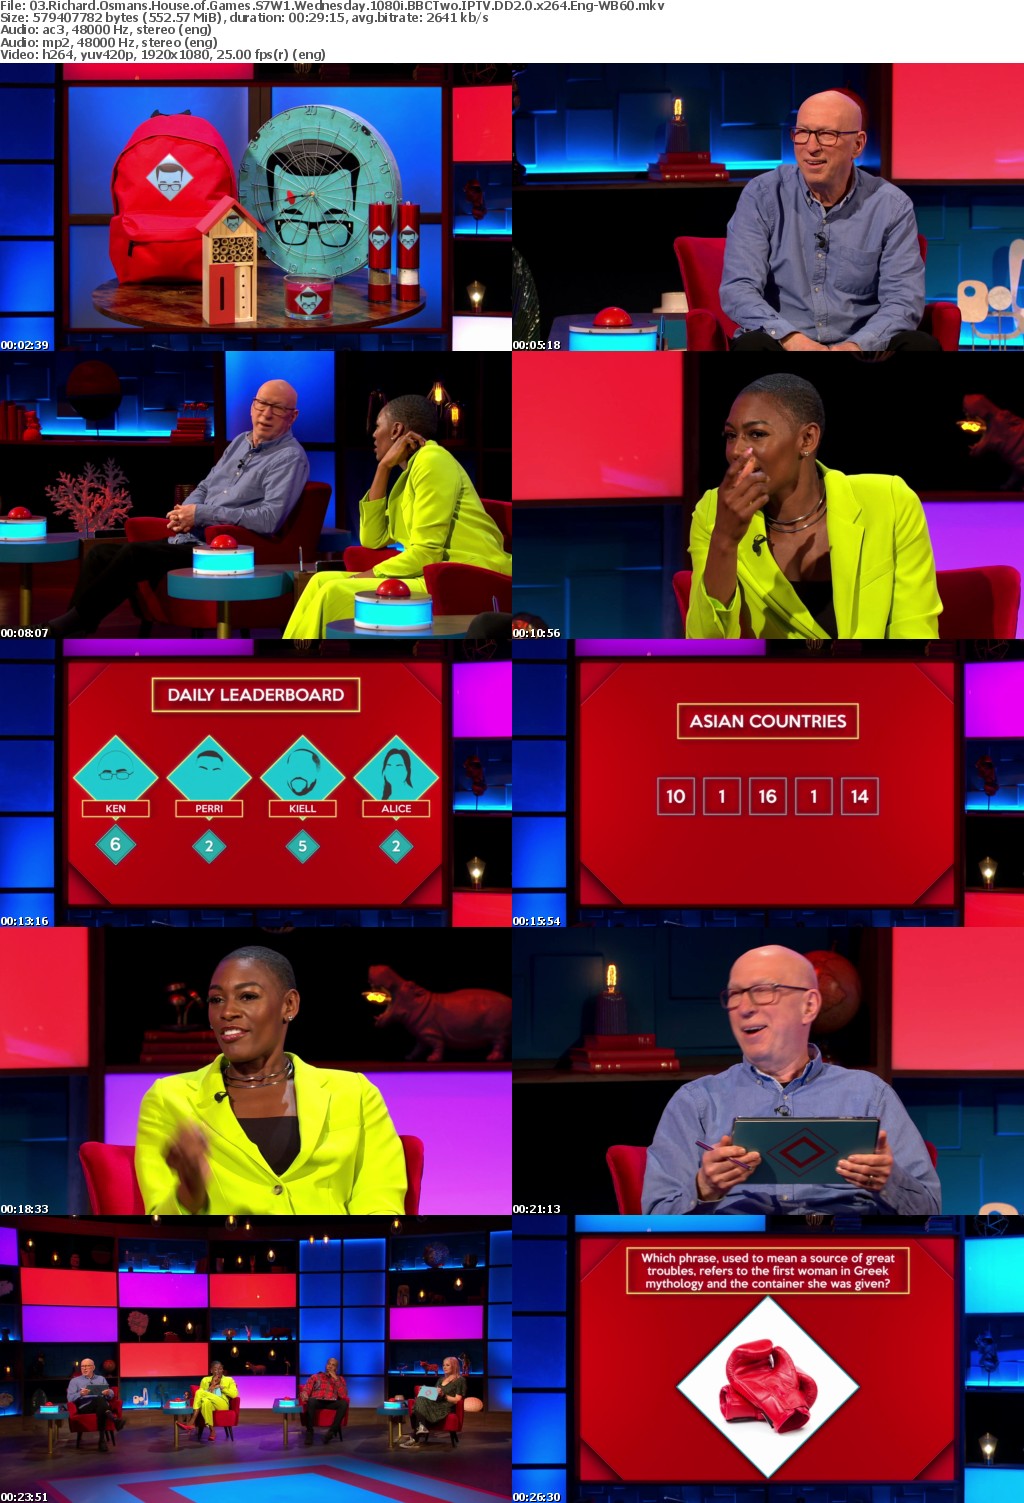 Richard Osmans House of Games S7W1 COMPLETE 1080i MiXED BBCTwo IPTV DD2 0 x264 Eng-WB60